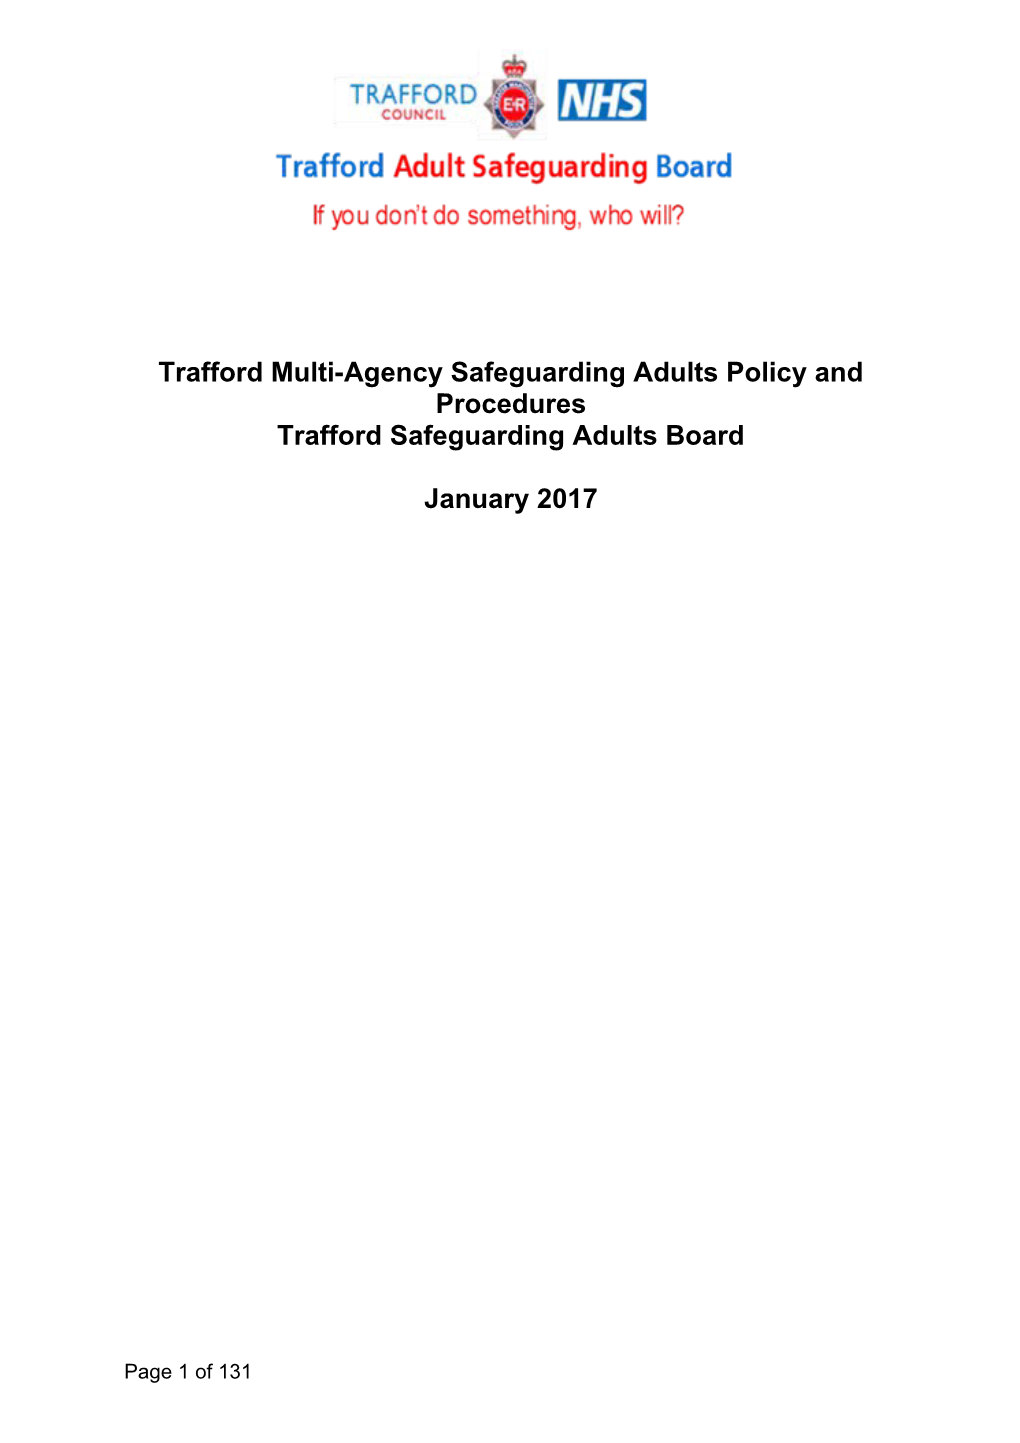 Trafford Multi-Agency Safeguarding Adults Policy and Procedures